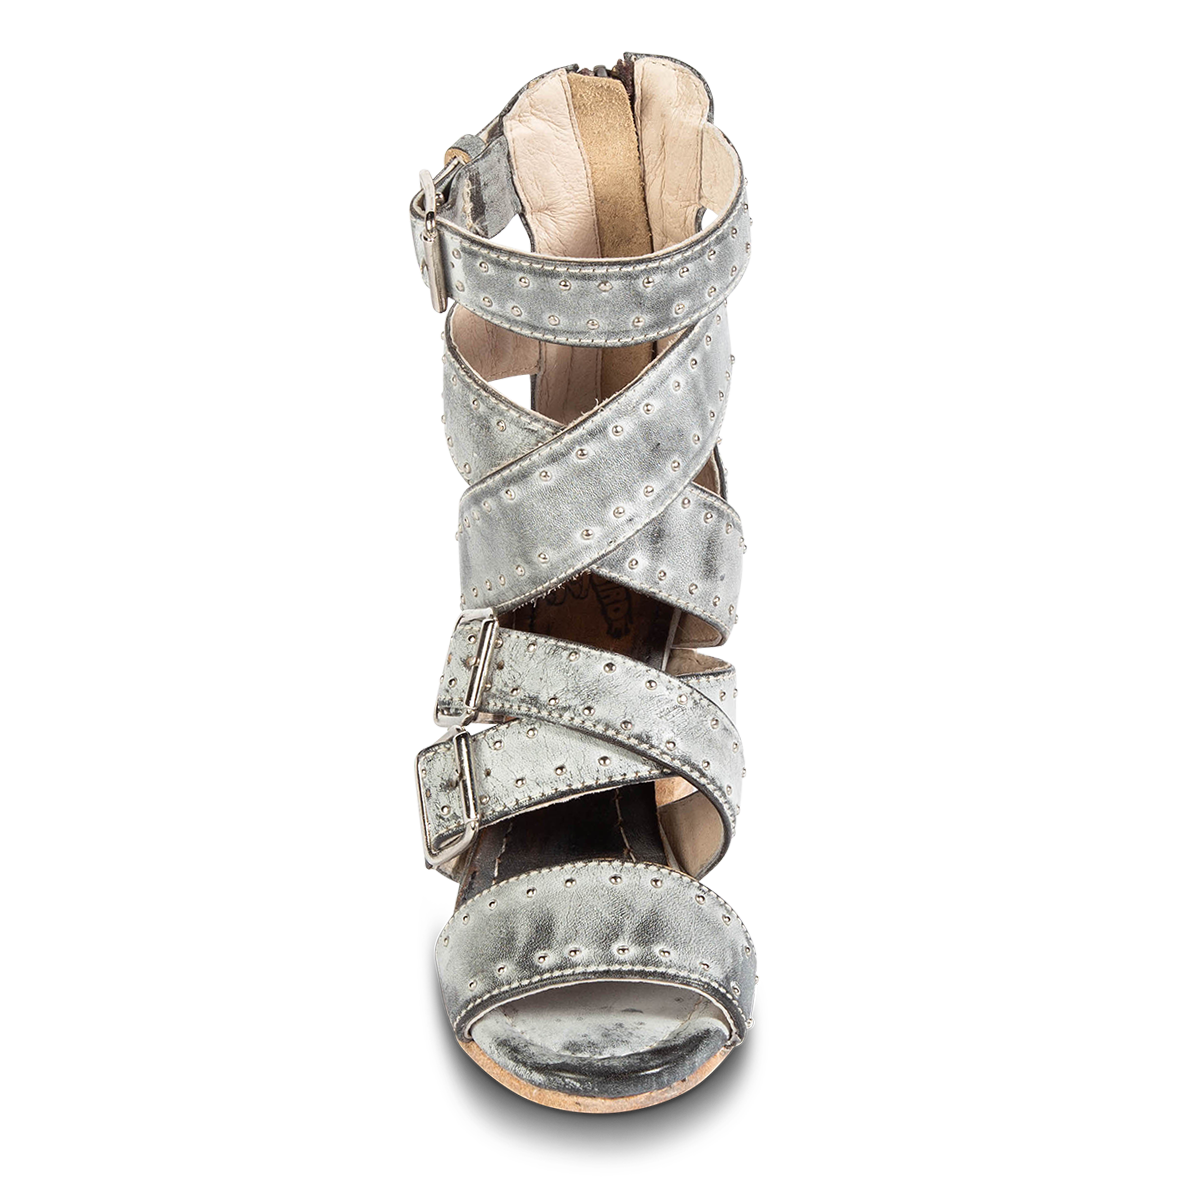 Front view showing strap and buckle detailing FREEBIRD women's Tanica ice sandal